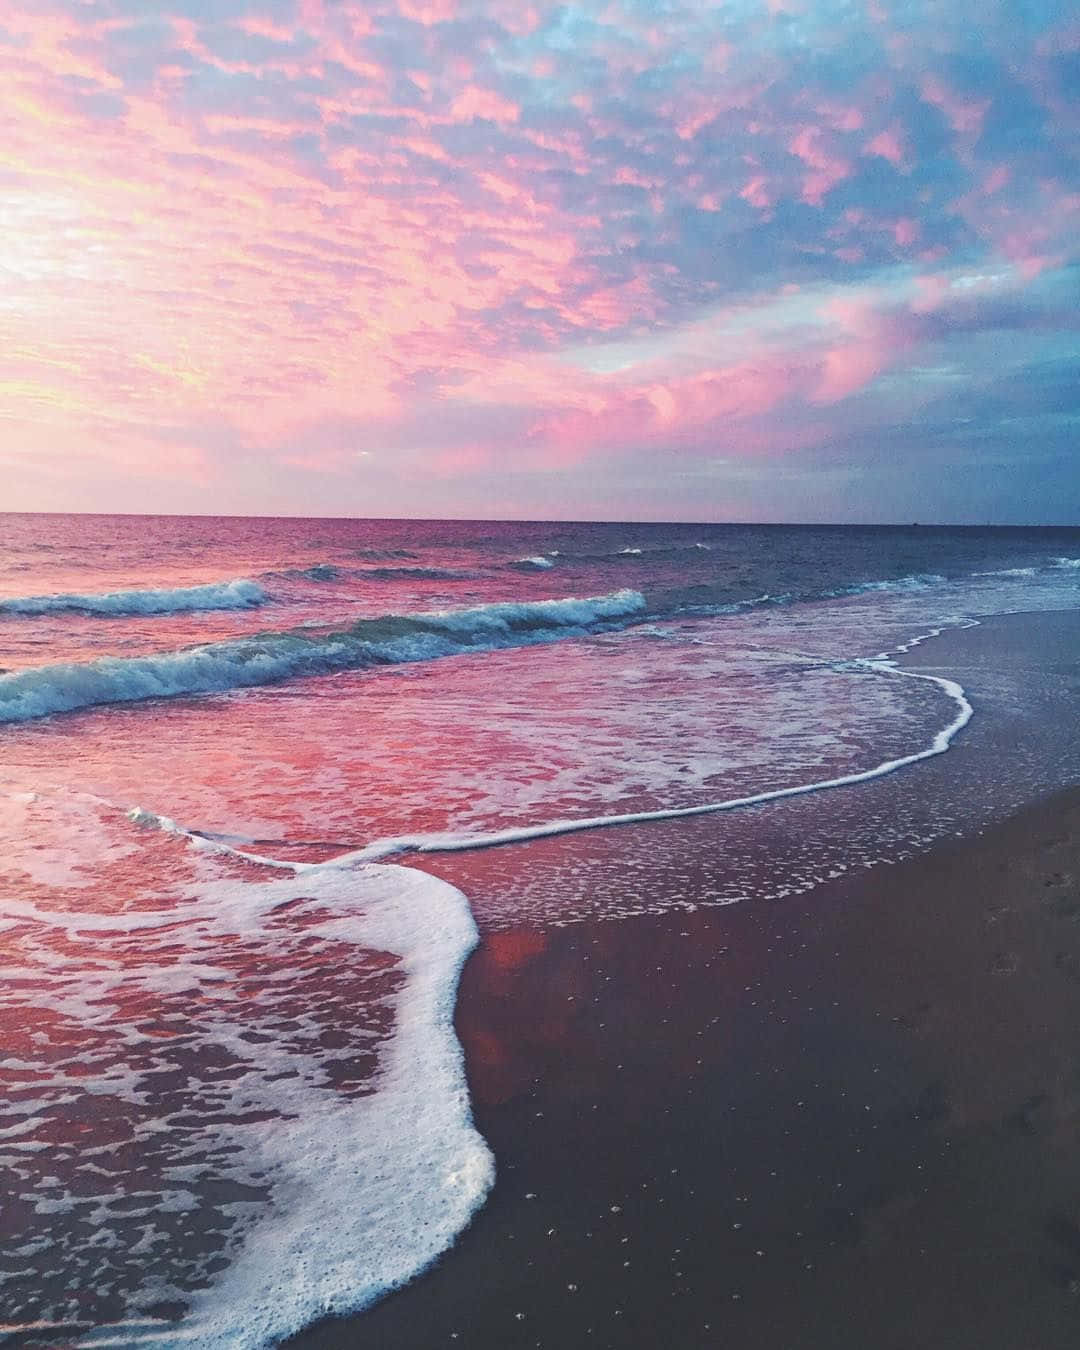 A beautiful sunset over the ocean with pink and purple hues. - Coast